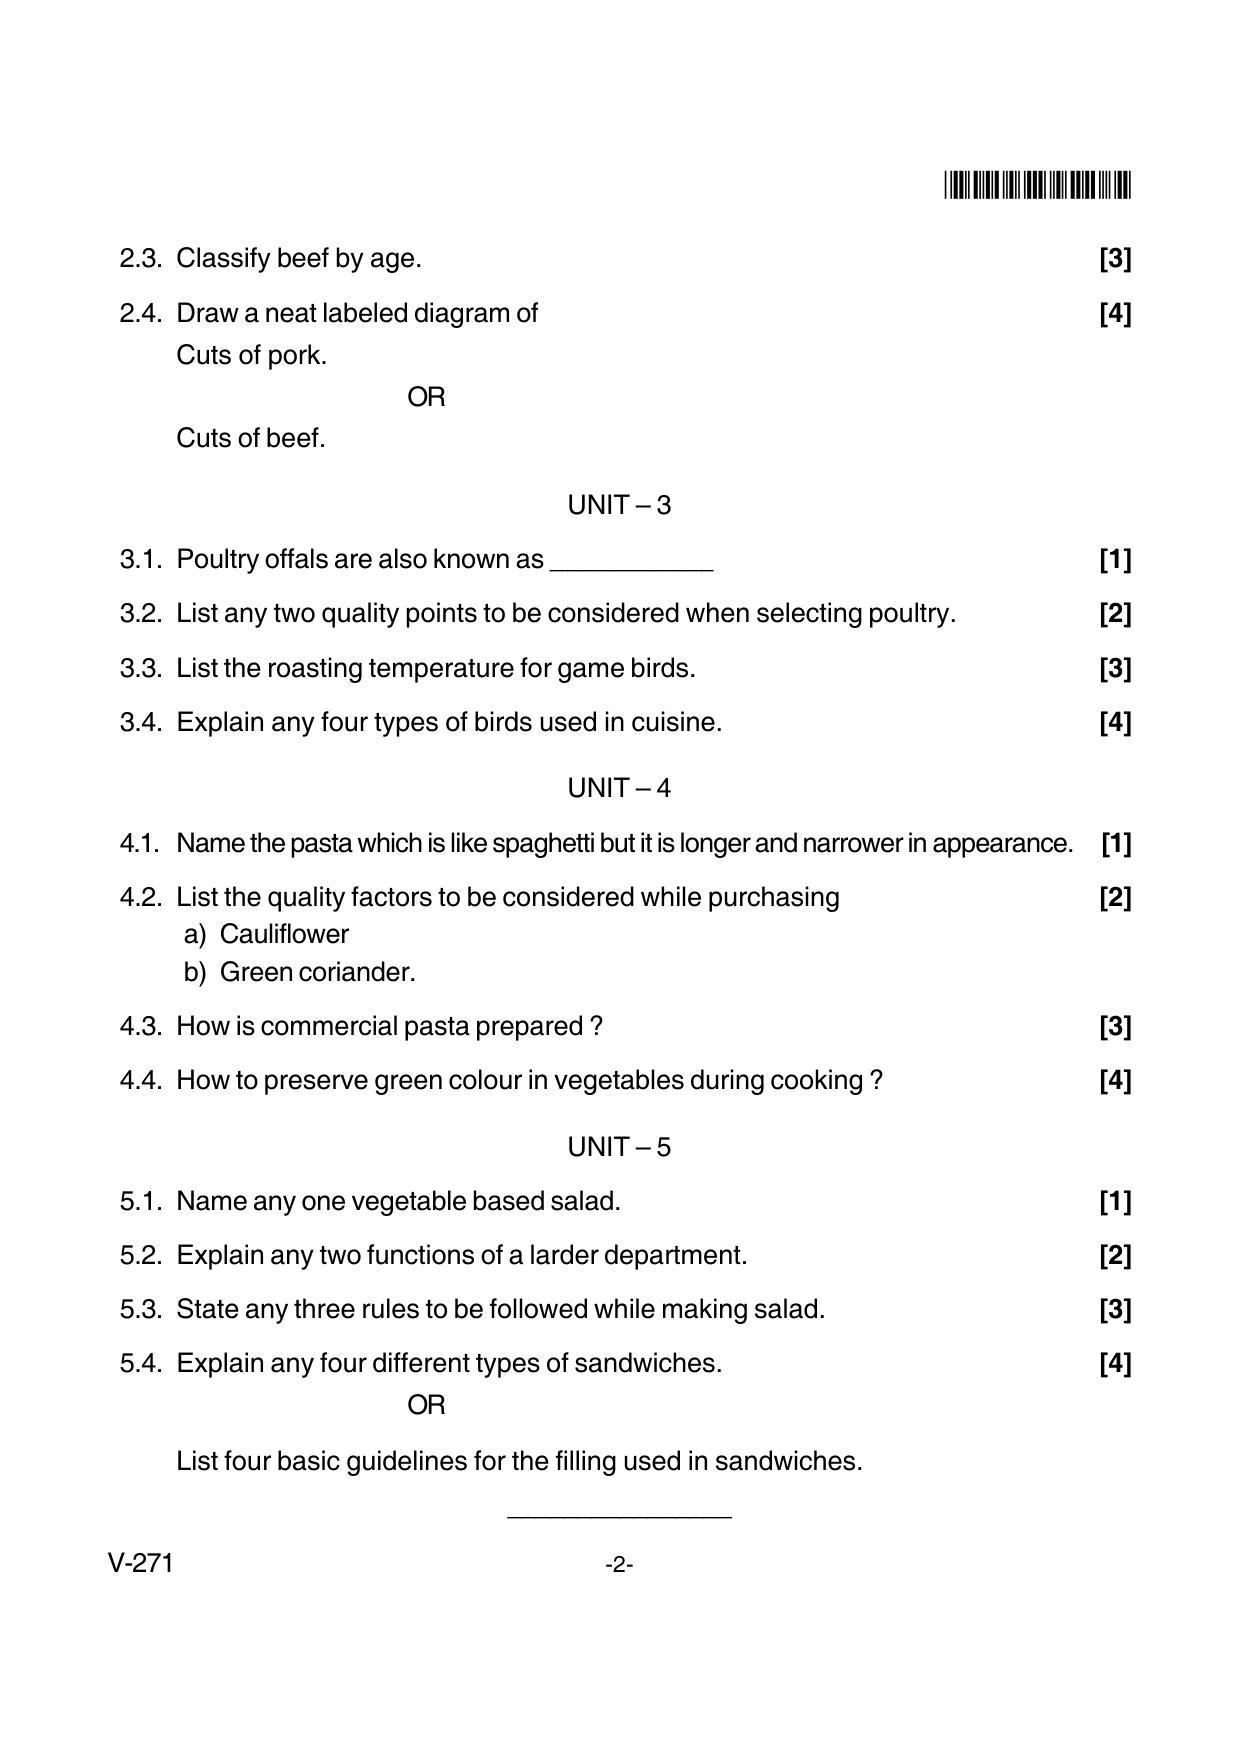 Goa Board Class 12 Food Production  Voc 271 New Pattern (March 2018) Question Paper - Page 2